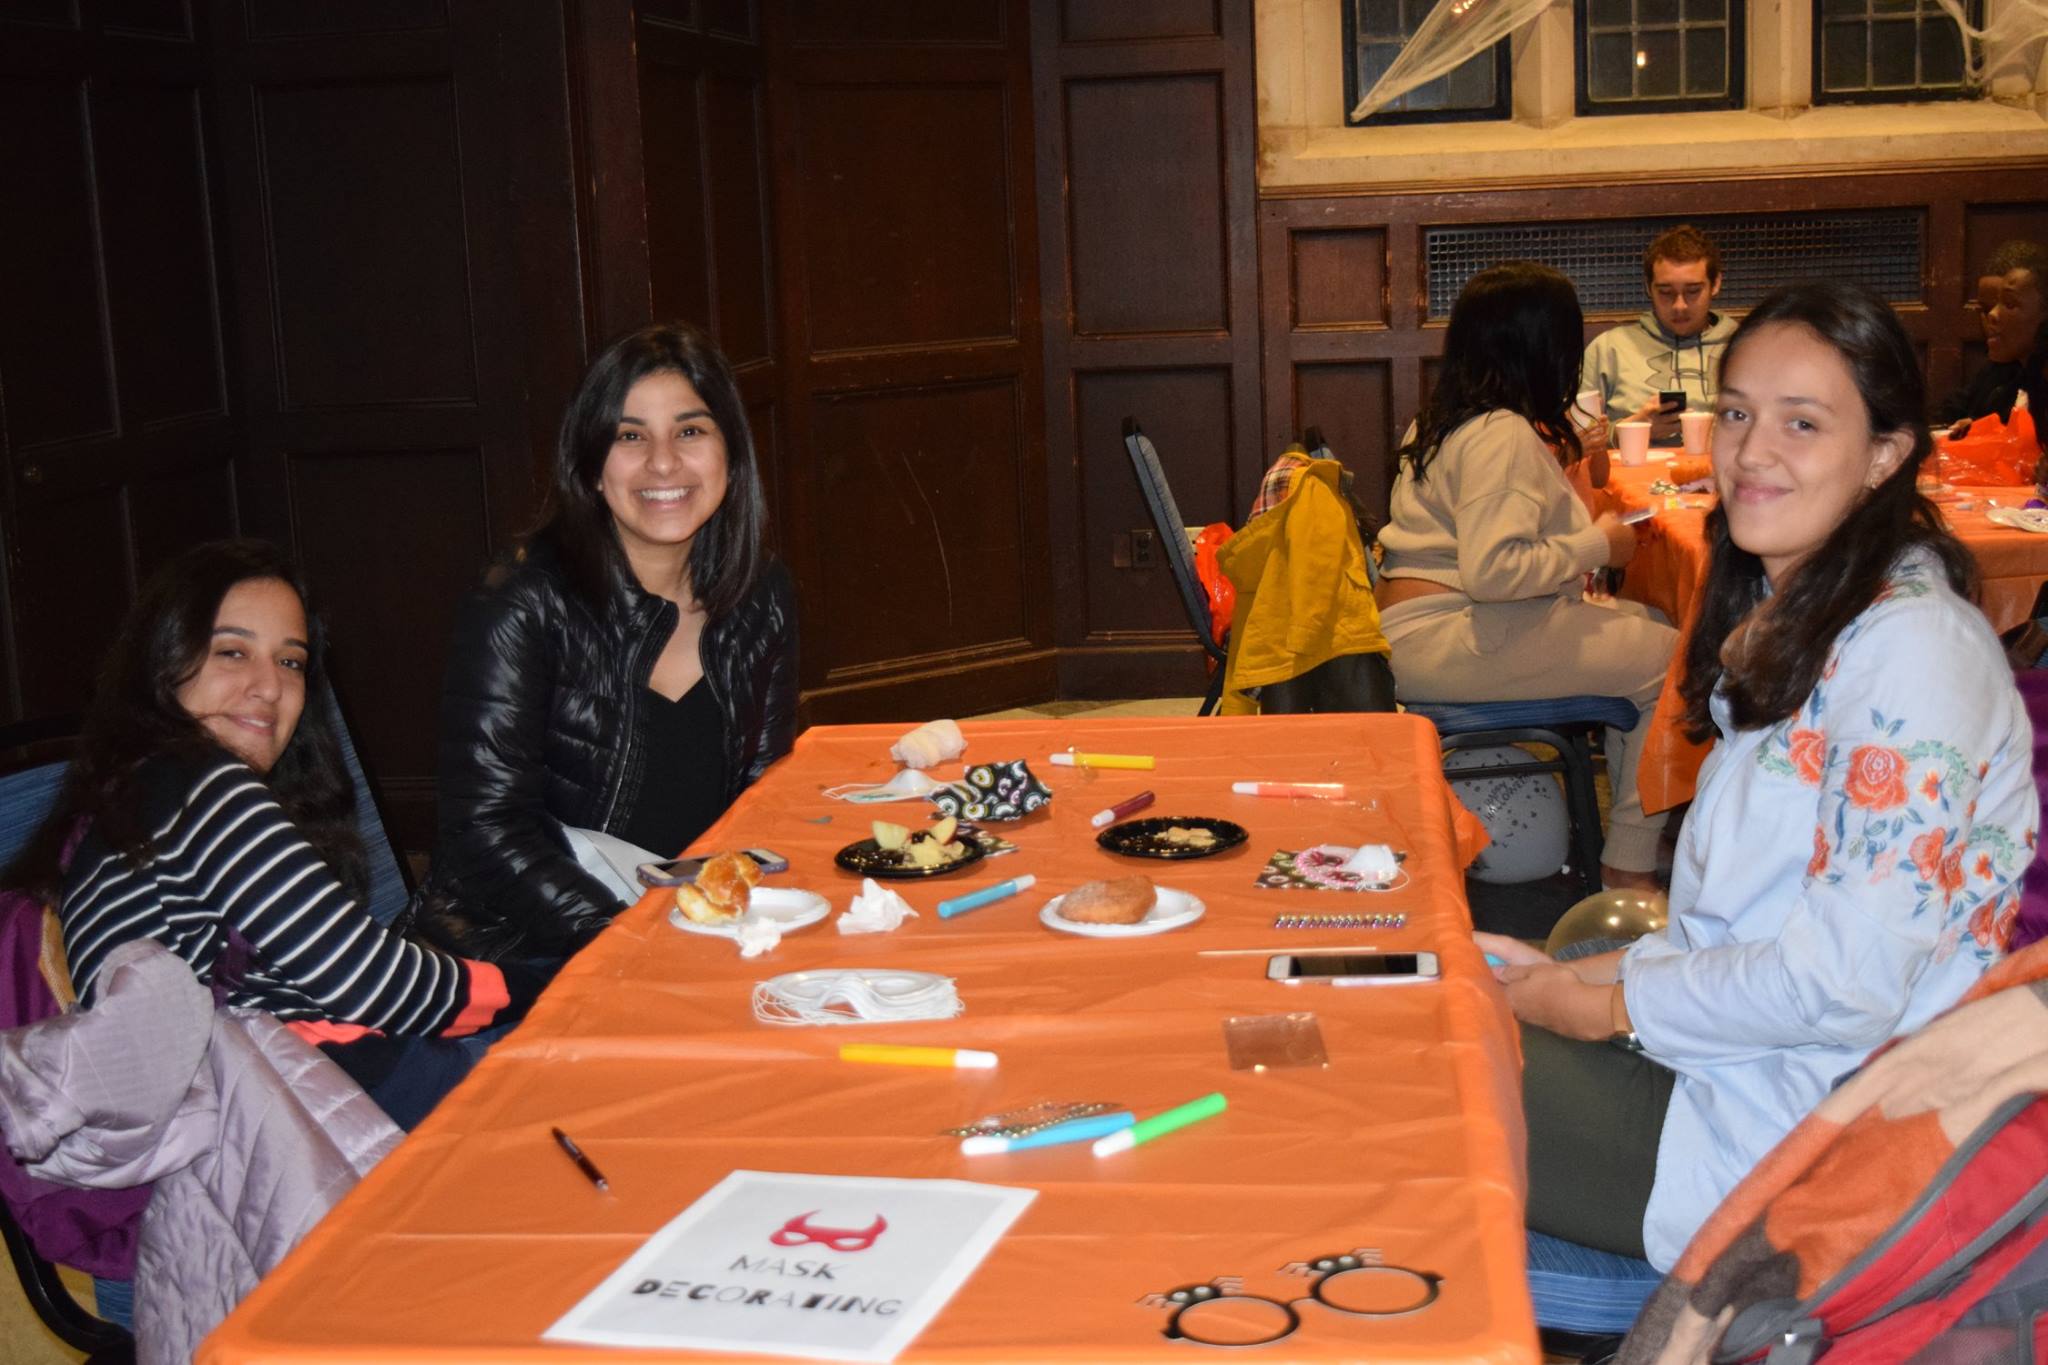 Penn Students decorating Halloween masks at a table together and enhoying the festivities